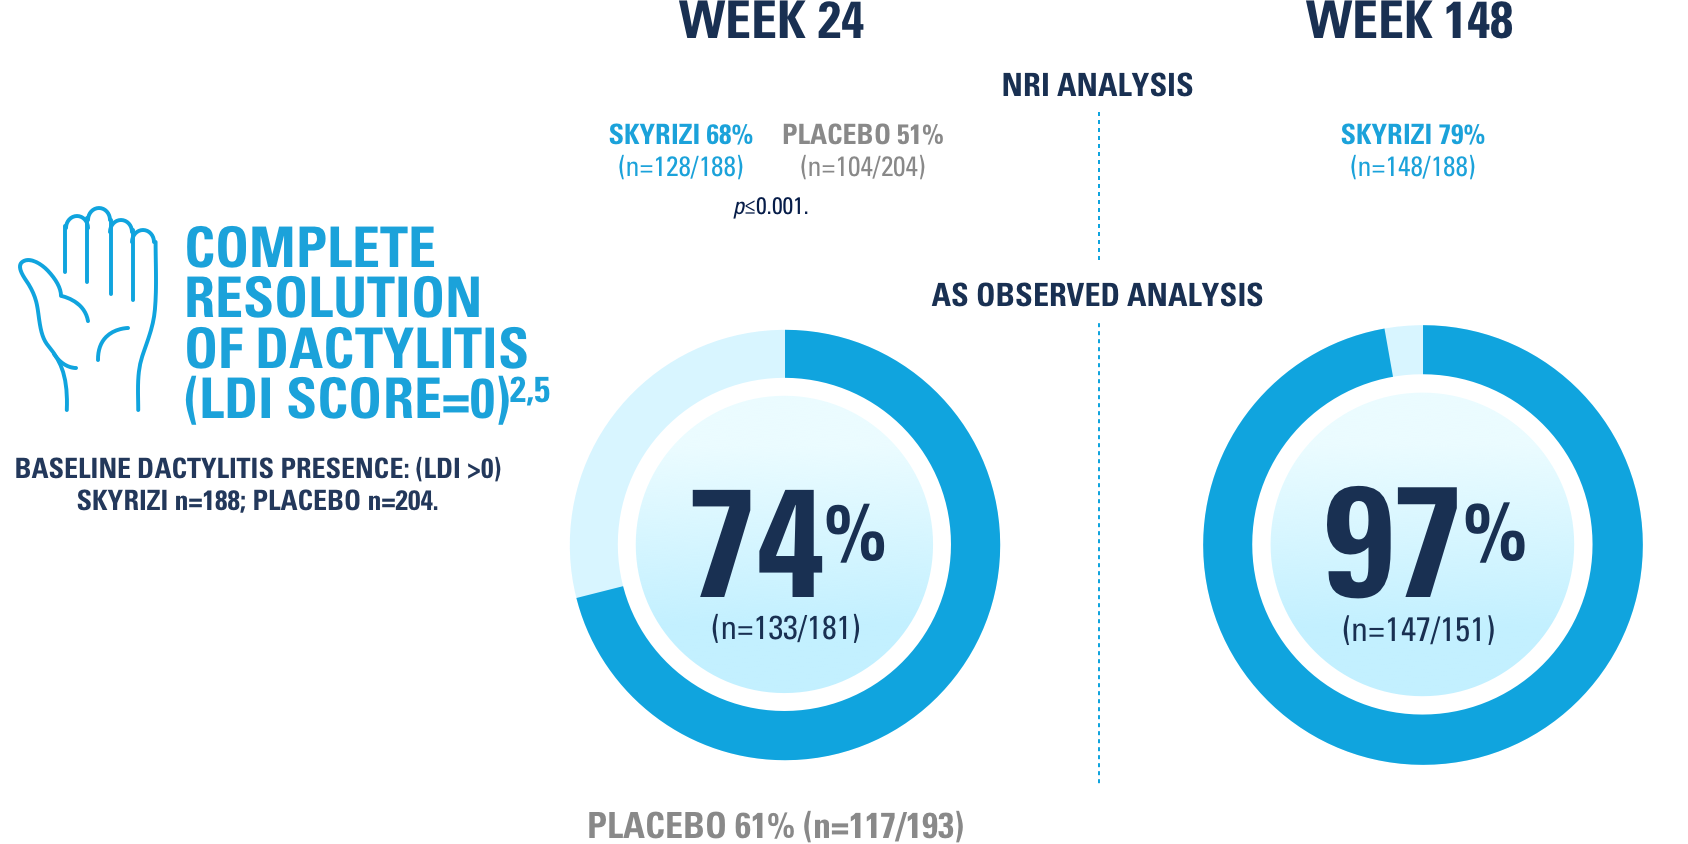 68% of SKYRIZI patients saw complete resolution of dactylitis at week 24 and 79% by week 148.